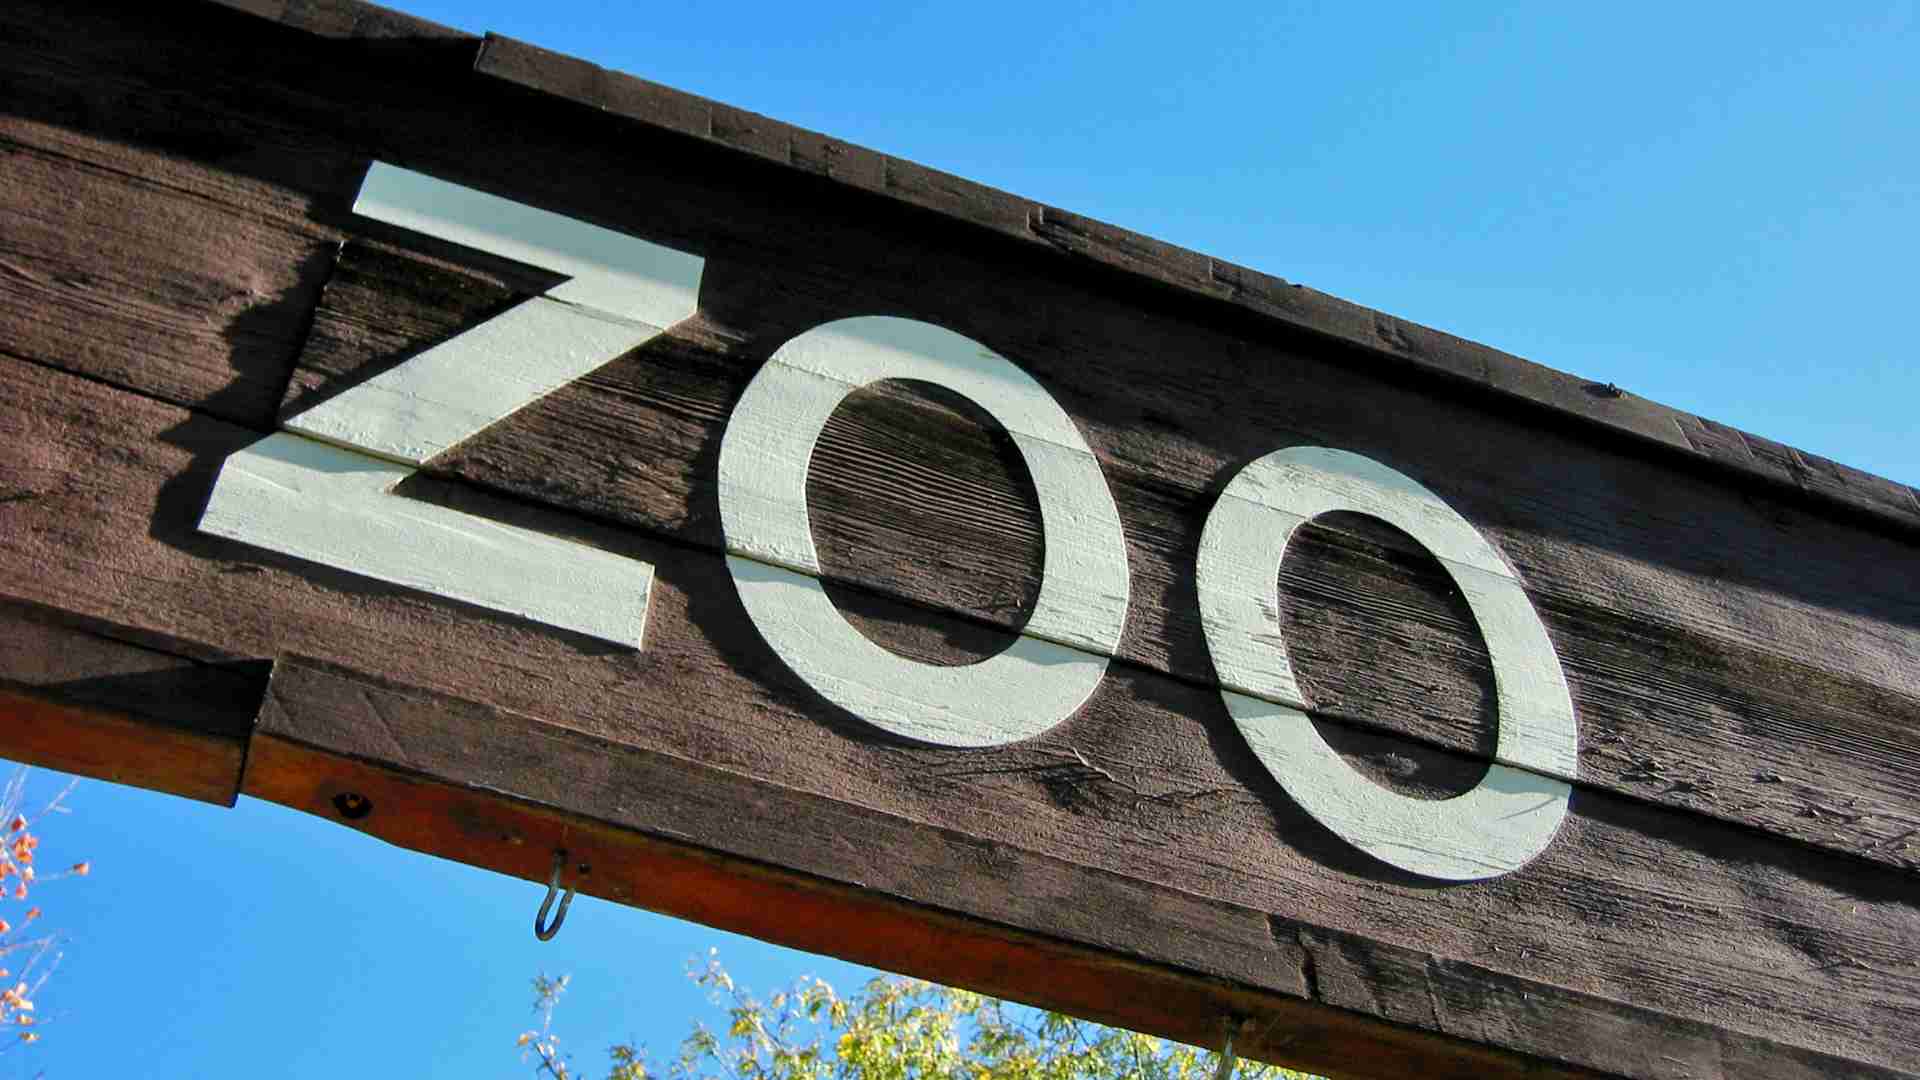 There are some museums and zoos that offer discounts for SNAP beneficiaries in the United States, so it is not just about Food Stamp payments